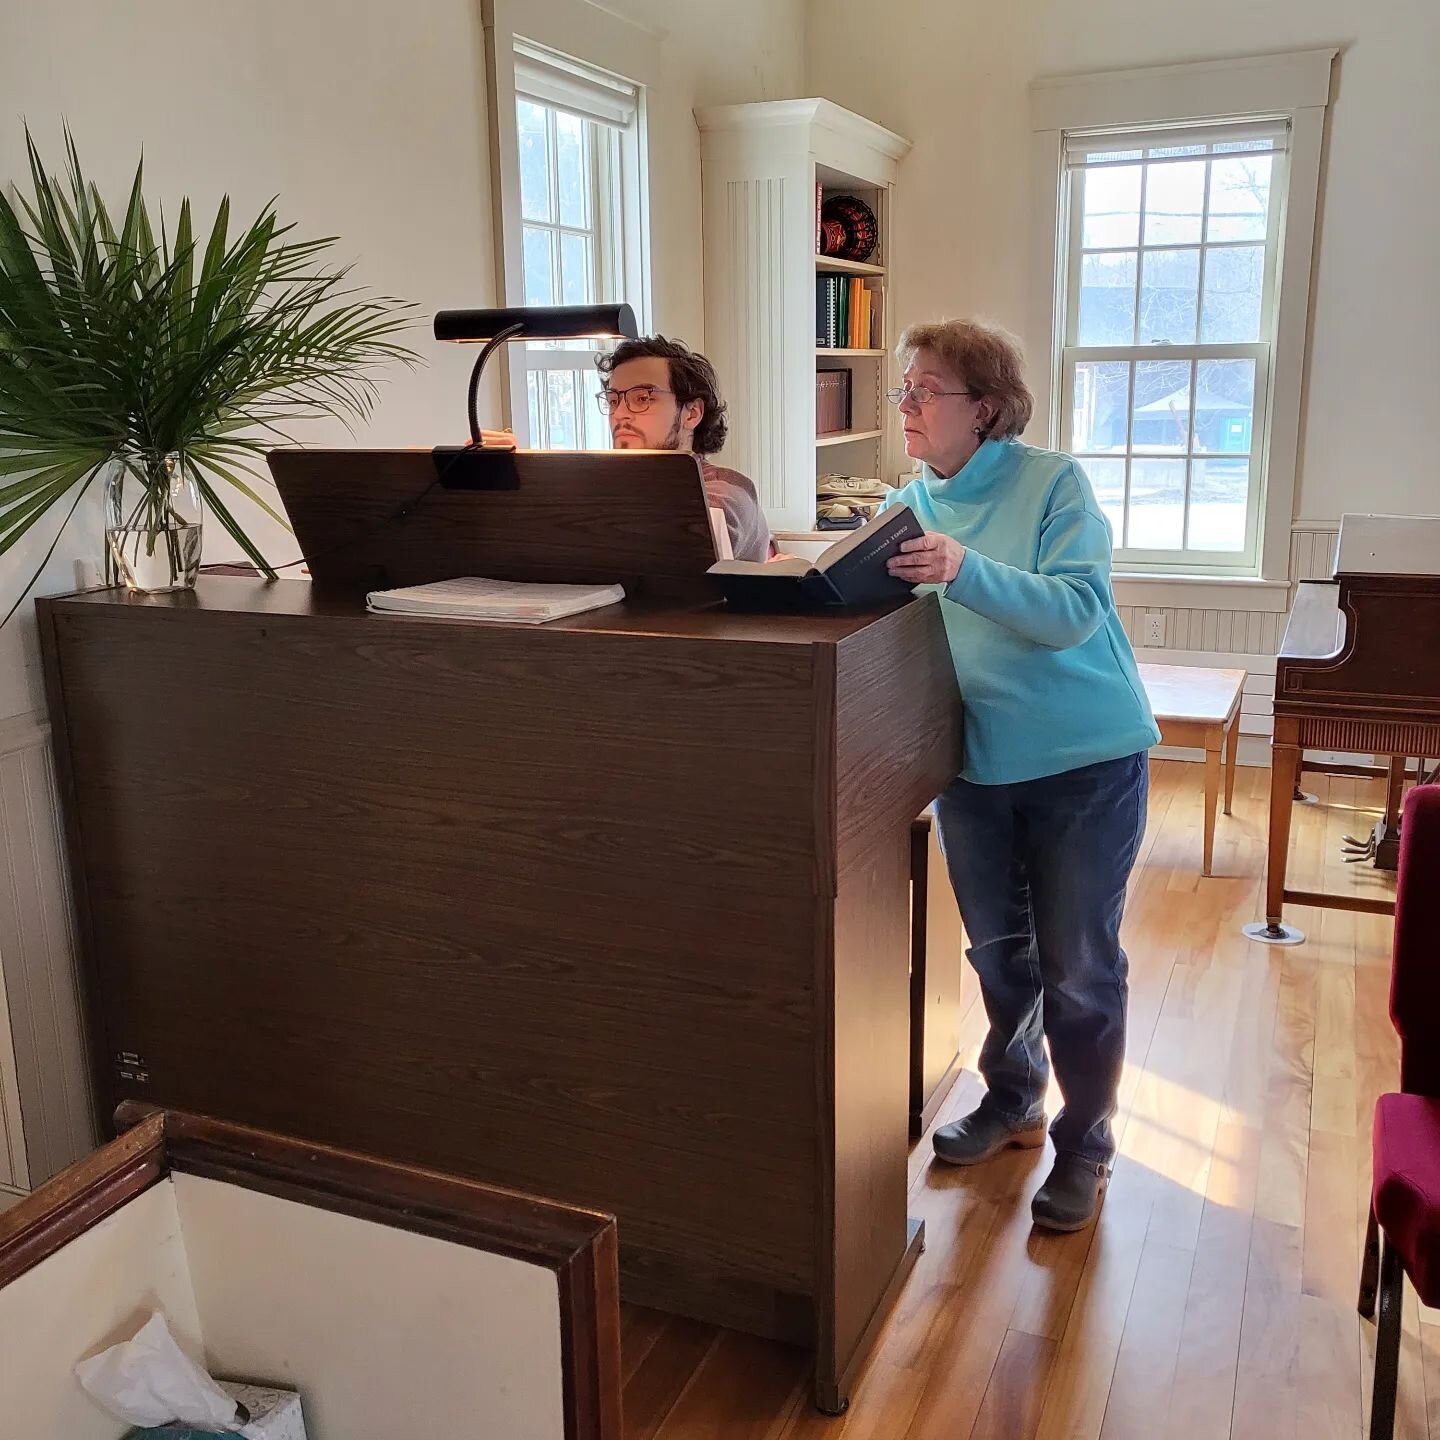 Easter hymns are being rehearsed with @gabe.sequeira.music and Natalie! Sing with us on Sunday, April 17, 10:00am. 

#stjohnsstowe
#stowevt
#theepiscopalchurch #holyweek #easterday @revdochockey